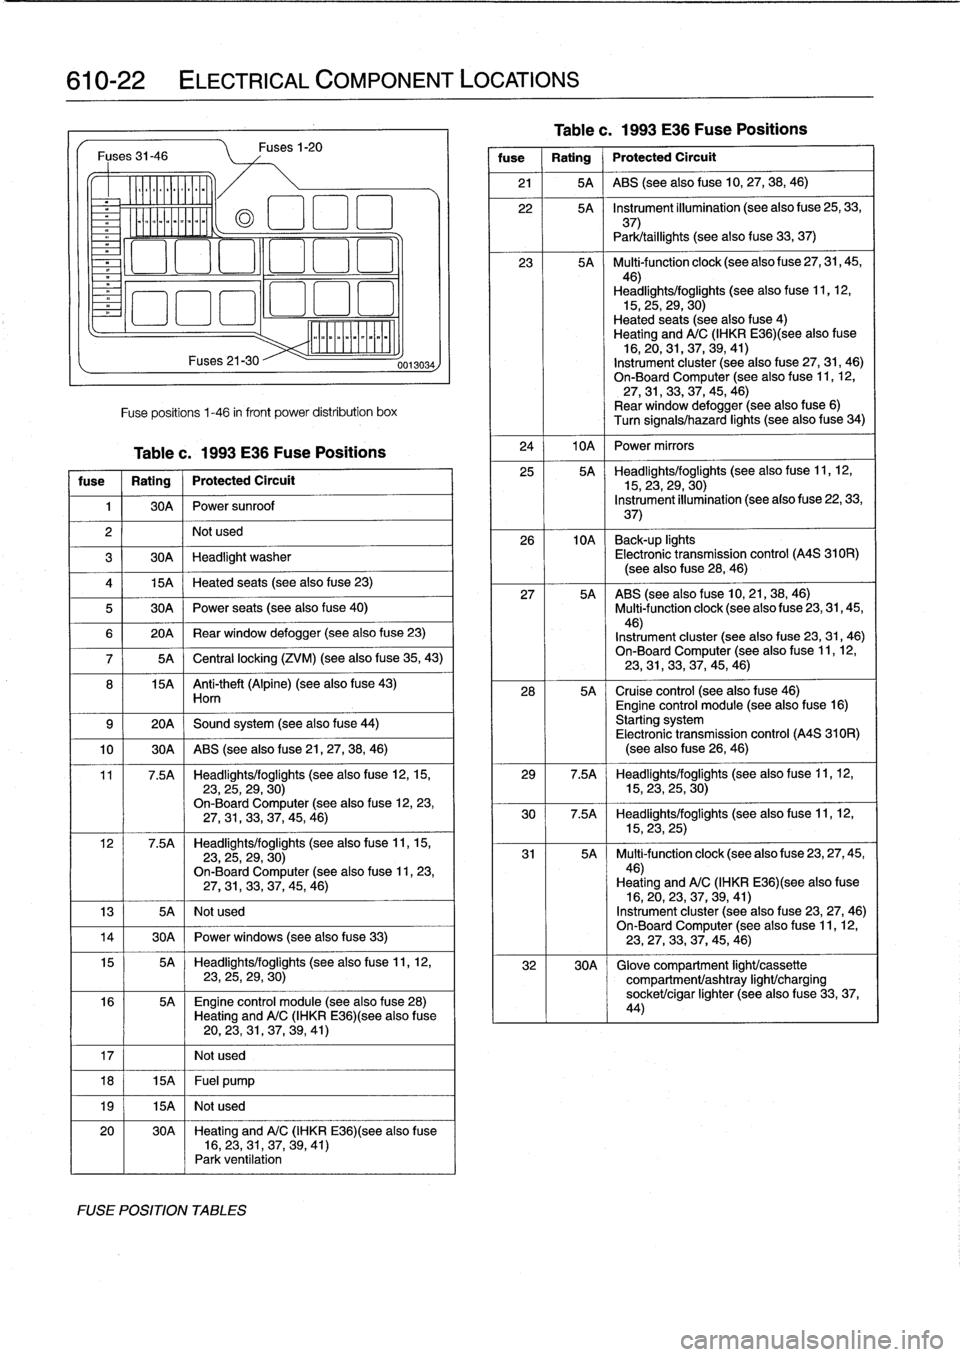 BMW 318i 1997 E36 User Guide 
610-22

	

ELECTRICAL
COMPONENT
LOCATIONS

Fuses
31-46

Ylililll

milililil
Fuses
21-30
Fuse
positions
1-46
in
front
Power
distribution
box

Table
c
.
1993
E36
Fuse
Positions

fuse

	

1
Rating

	

j